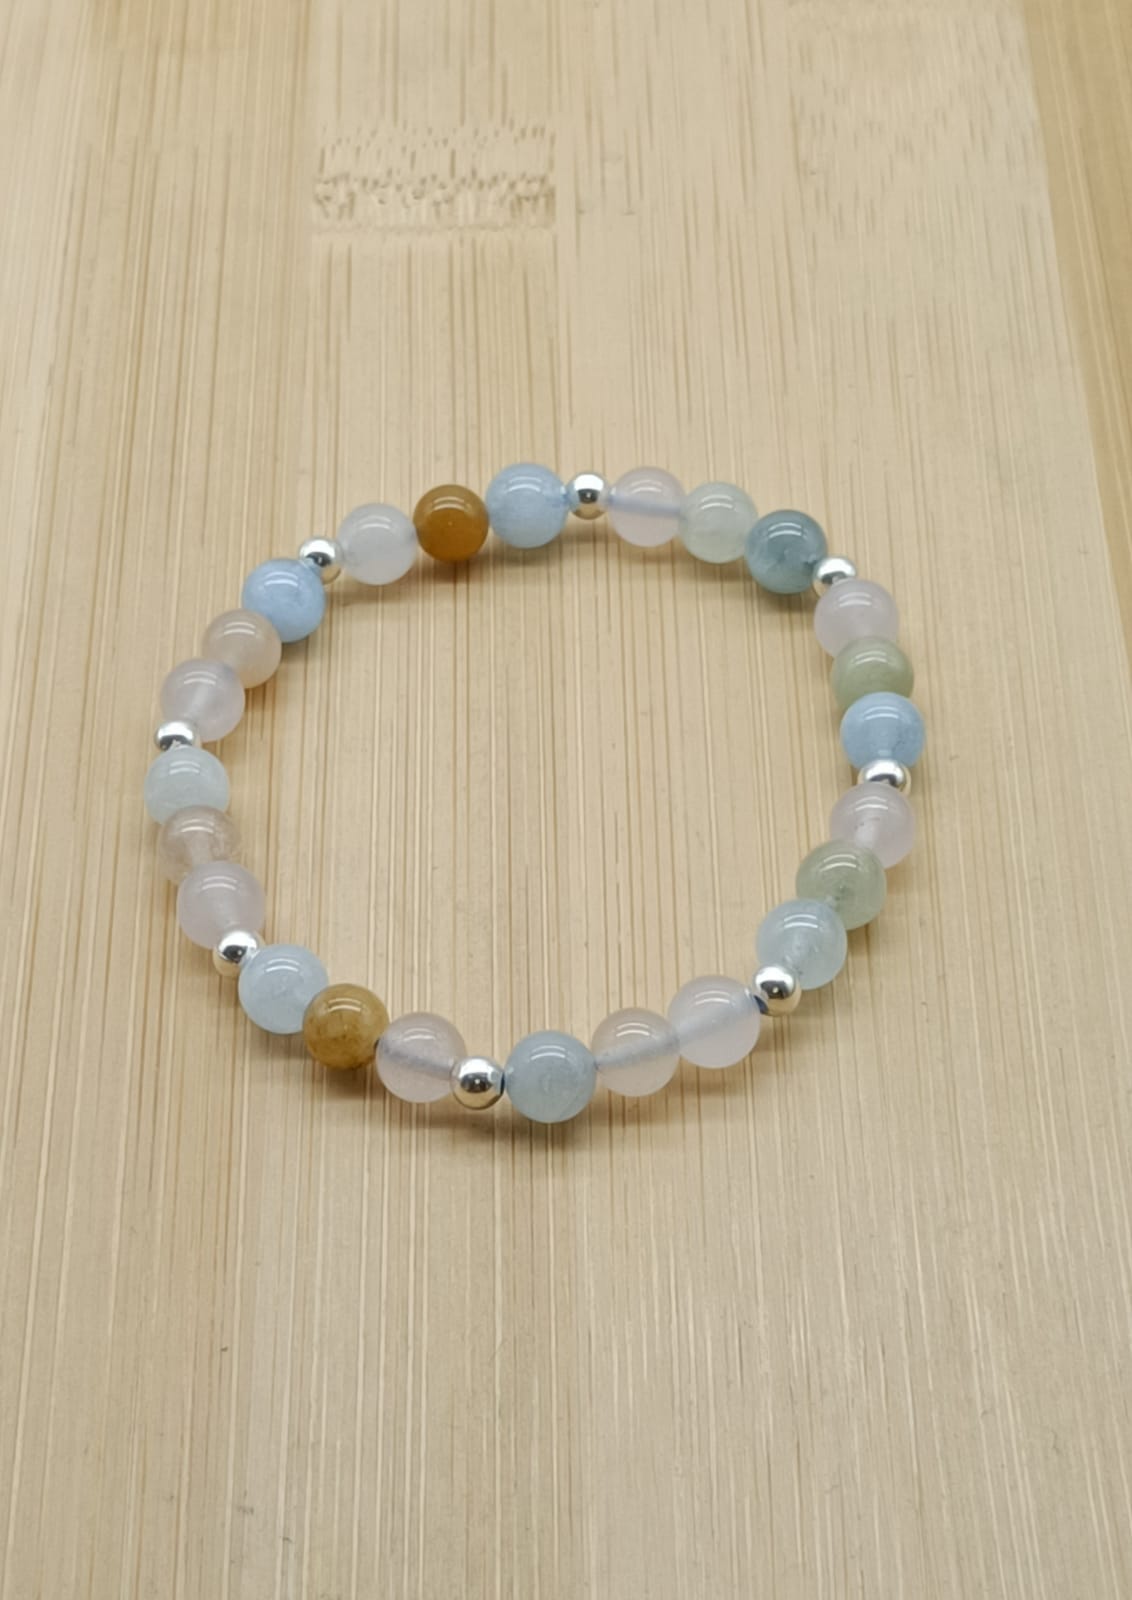 Bracelet of Love and Serenity 6mm